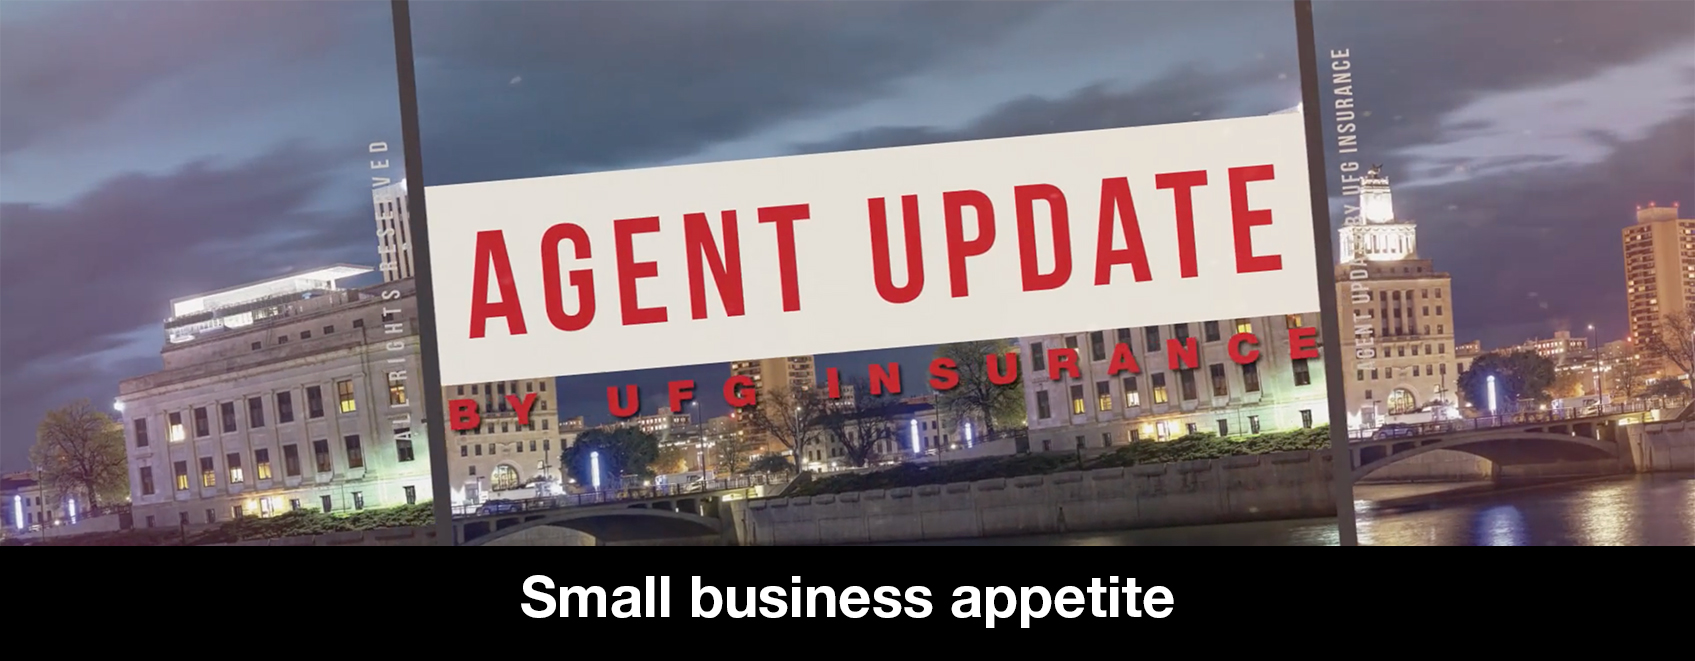 Agent update: small business appetite